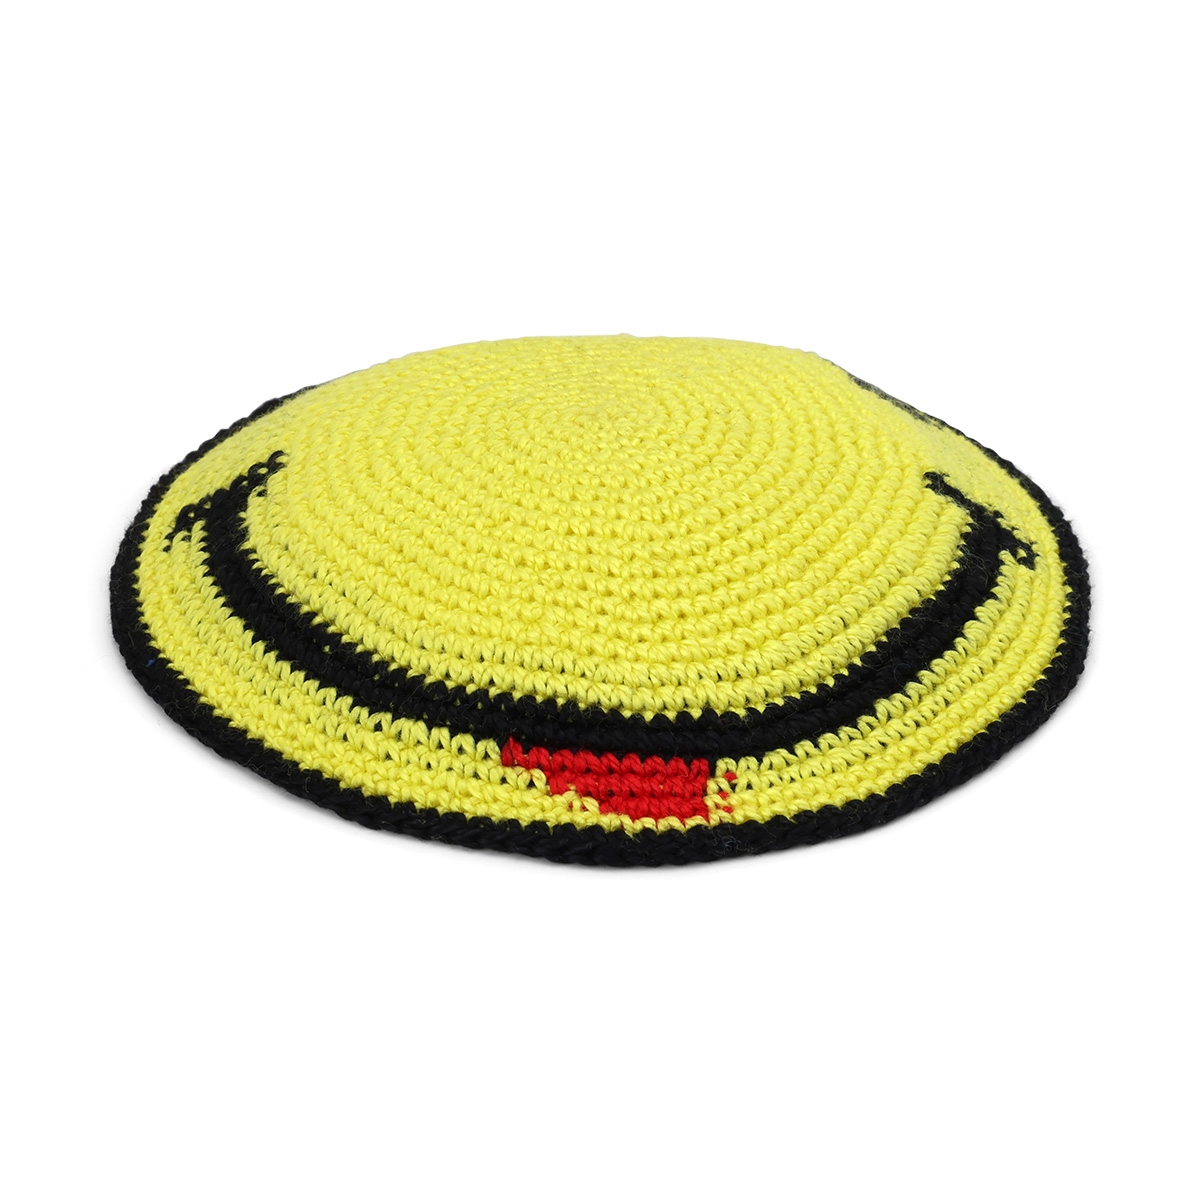 Hand Made Knit Kippah With Smiley Face (Yellow), Judaica | Judaica Webstore